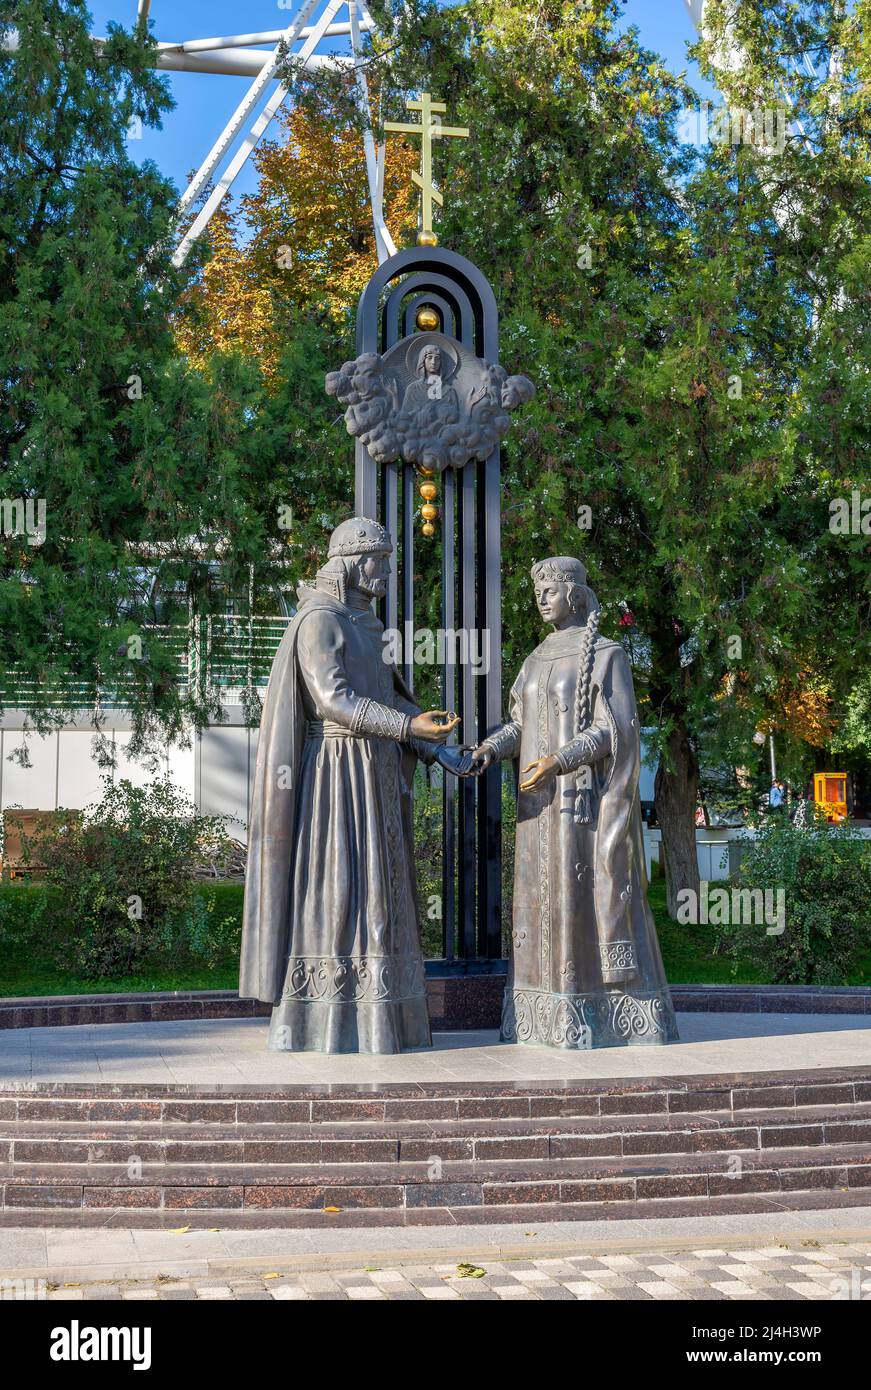 ROSTOV ON DON, RUSSIA - OCTOBER 03, 2021: Monument to Saints Prince Peter and Princess Fevronia Muromsky close-up, Rostov on Don. Russia Stock Photo